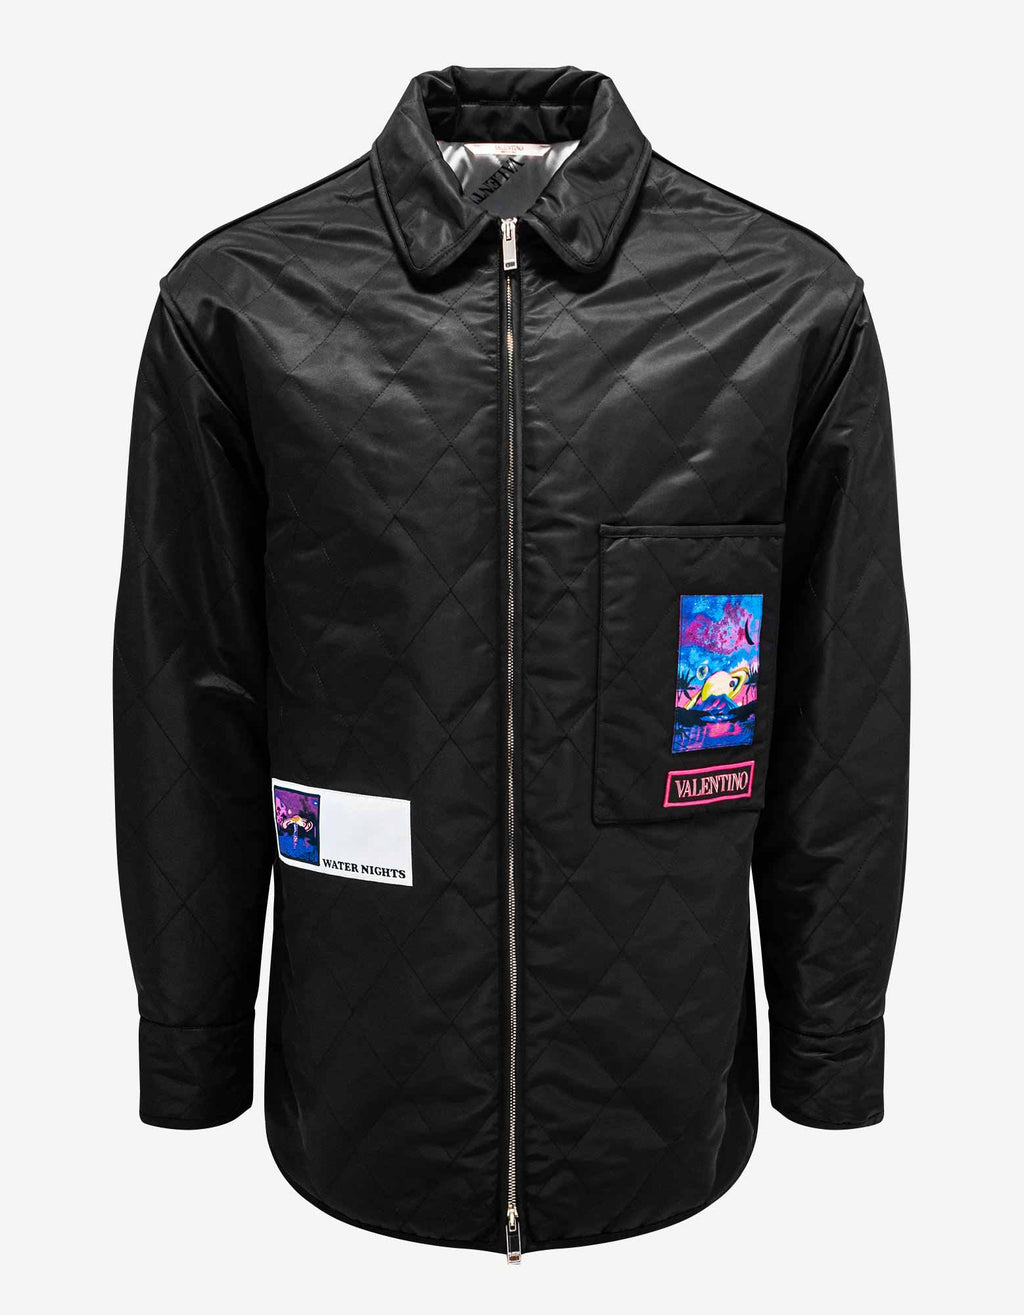 Valentino Valentino Black Quilted Jacket with Vaporwave Patches